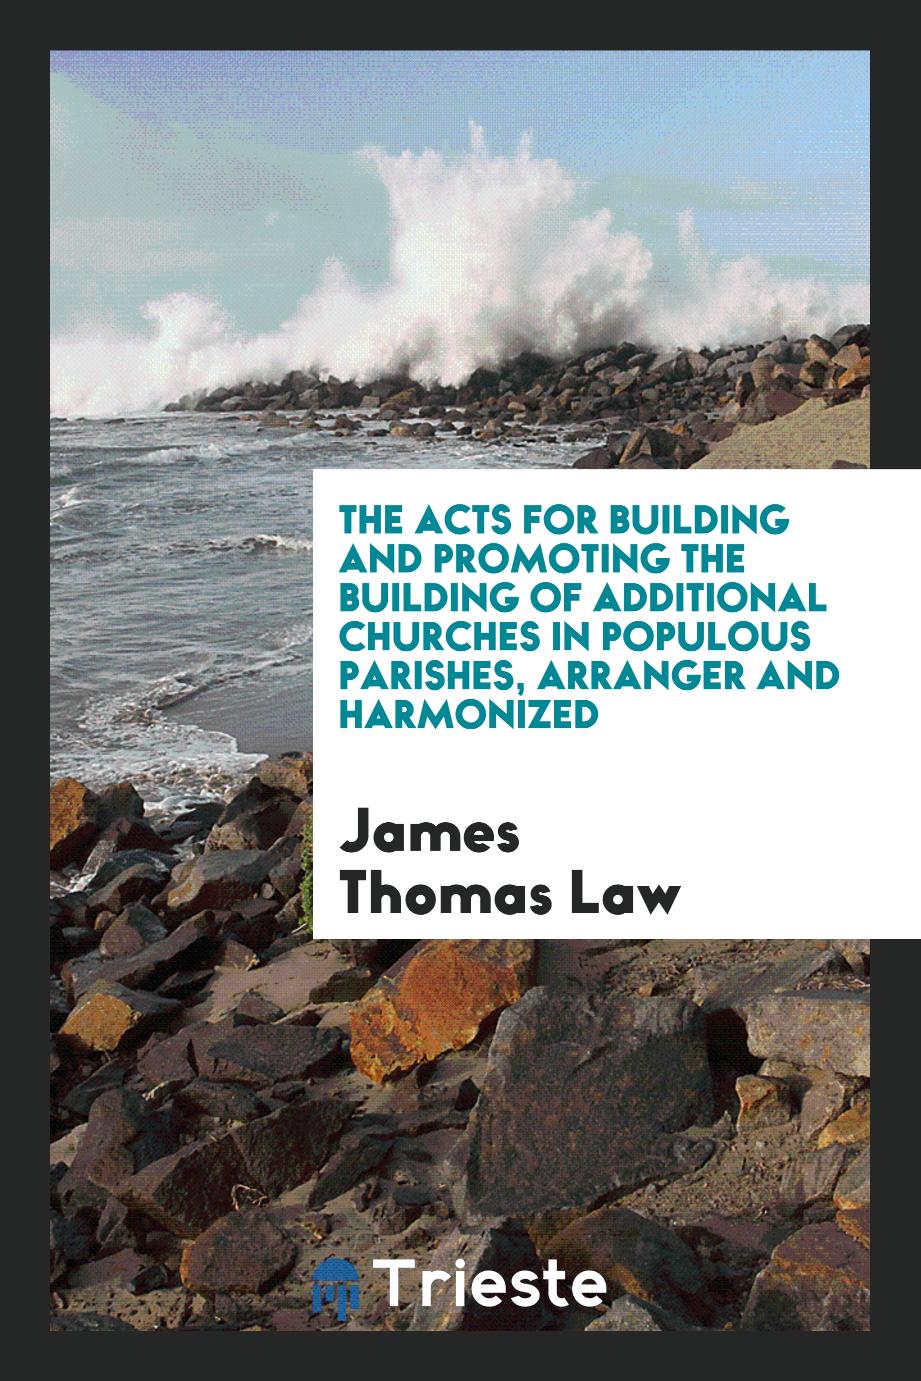 The Acts for Building and Promoting the Building of Additional Churches in Populous Parishes, Arranger and Harmonized